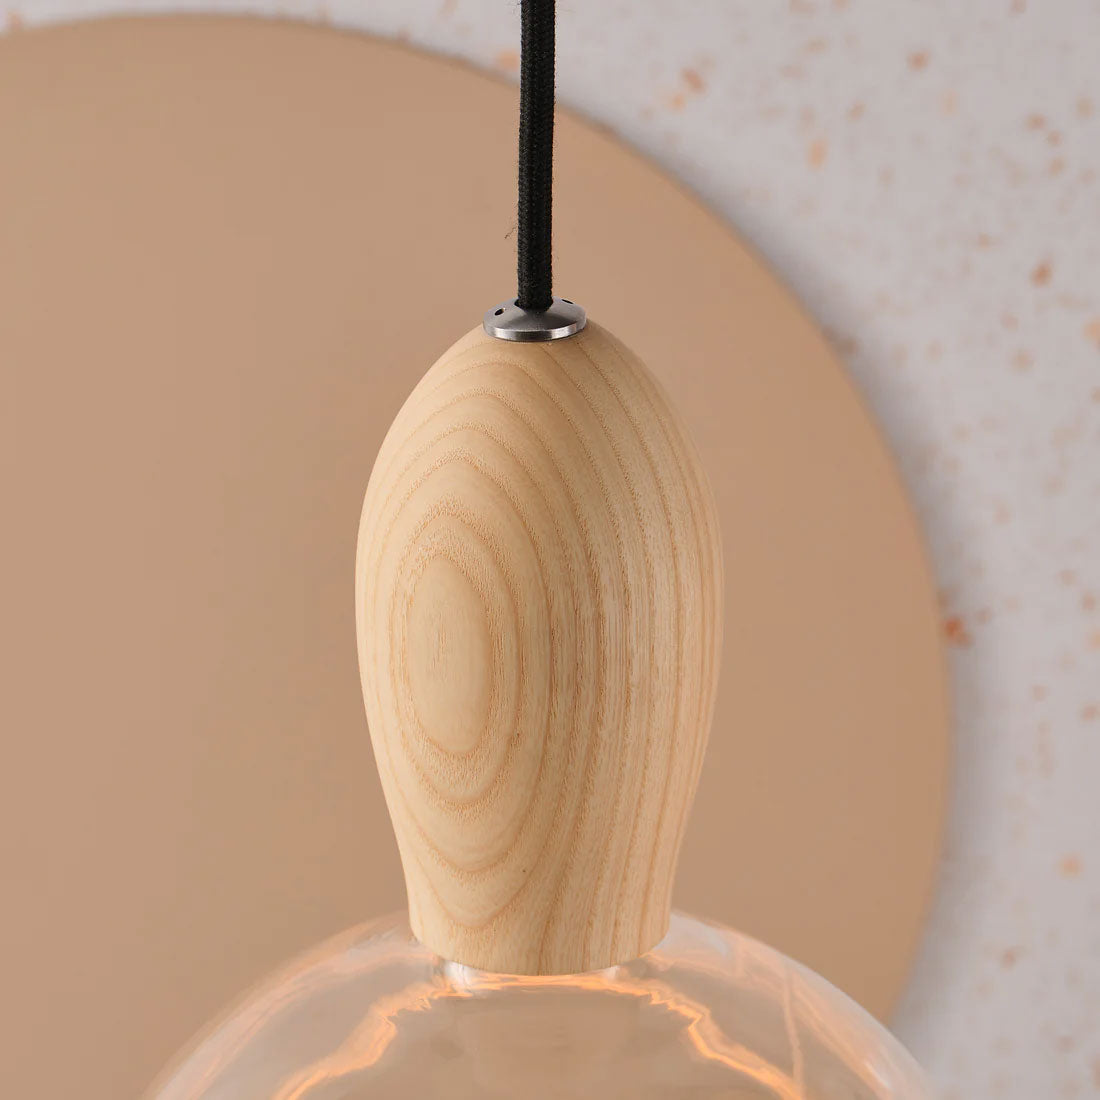 Beautiful detail on this Ash Woody Pendant Light from Well Lit and supplied by South Charlotte Fine Lighting